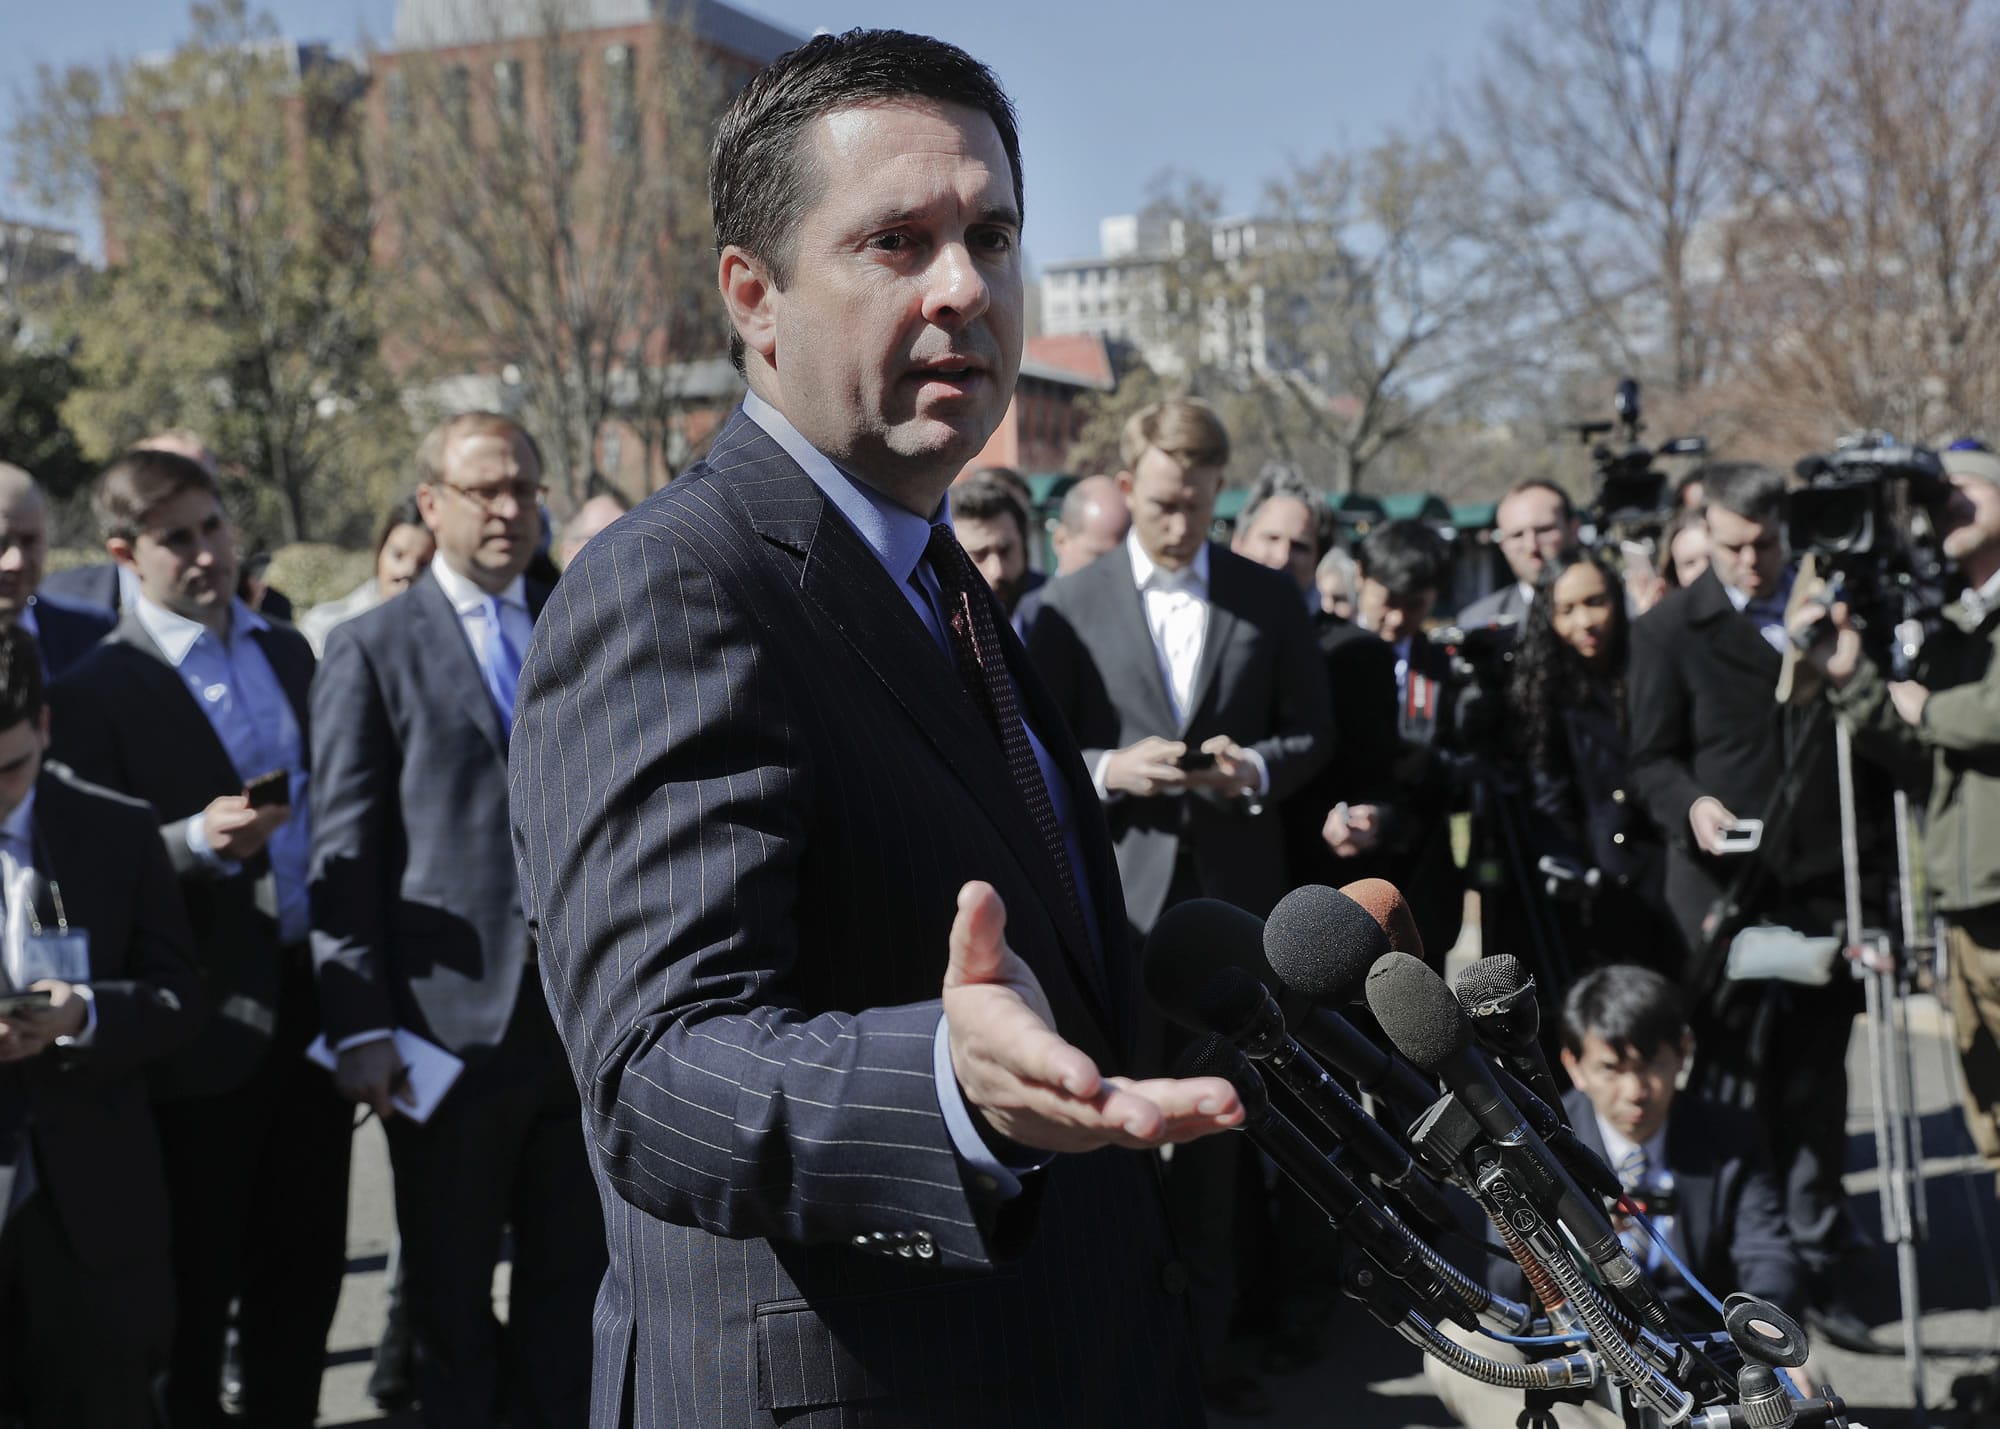 FILE - In this March 22, 2017 file photo, House Intelligence Committee Chairman Rep. Devin Nunes, R-Calif, speaks with reporters outside the White House in Washington following a meeting with President Donald Trump. Nunes’ spokesman says the congressman met on the White House grounds with the source of the claim that communications involving President Donald Trump’s associates were caught up in “incidental” surveillance.